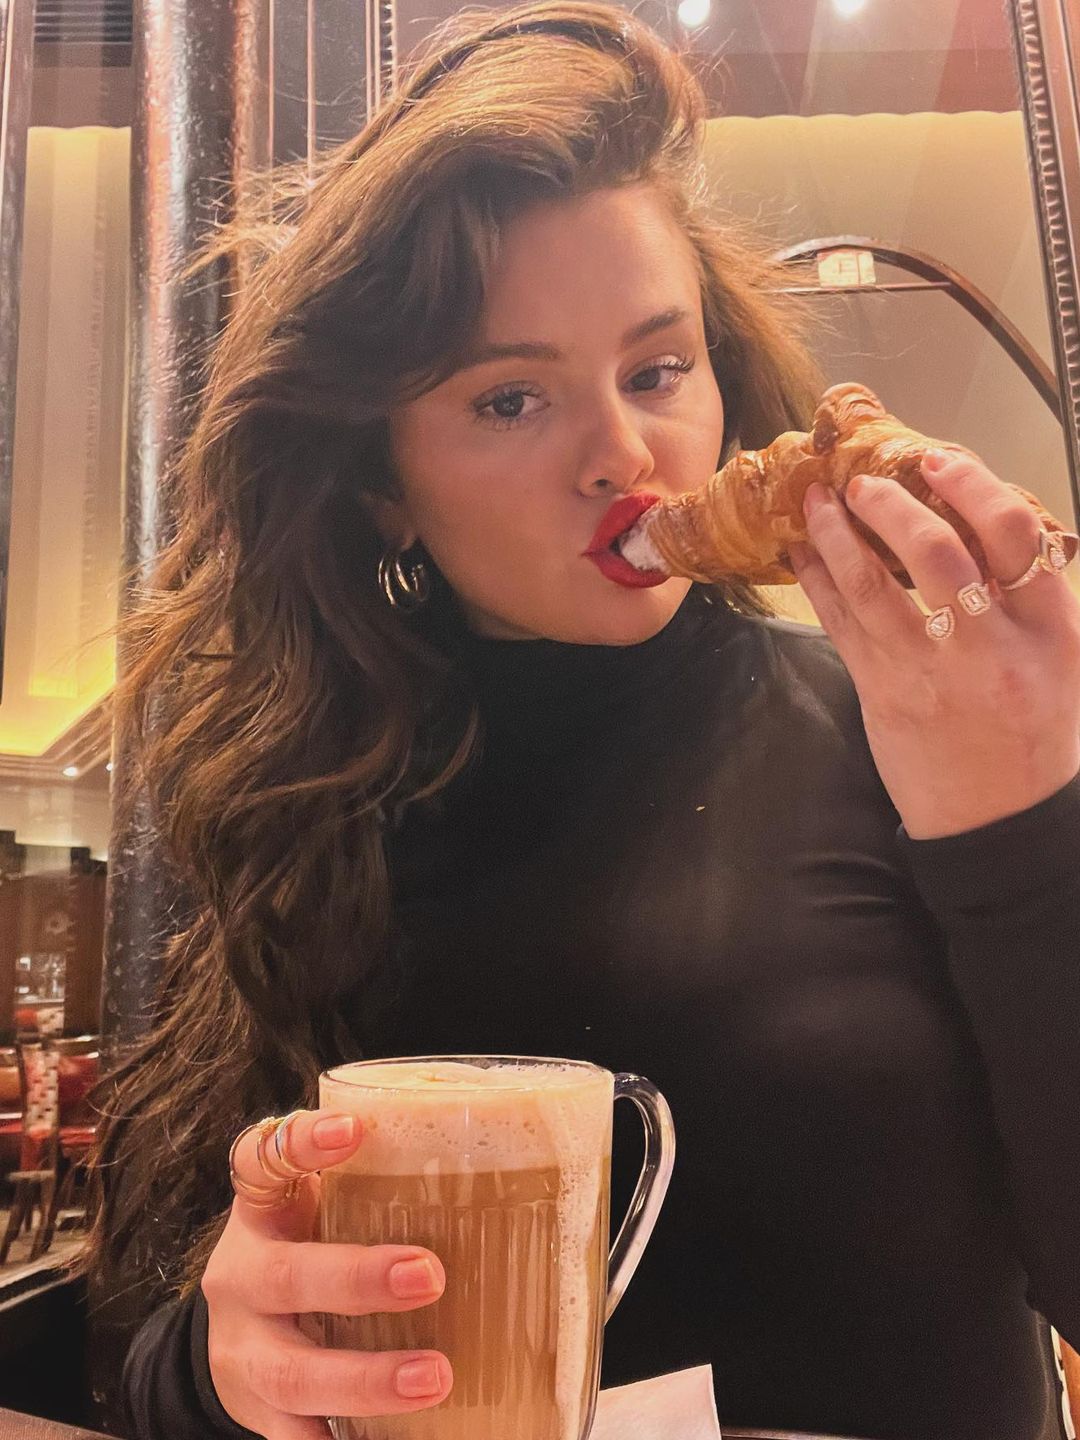 Selena Gomez eats a croissant in Paris wearing a black turtleneck and red lip